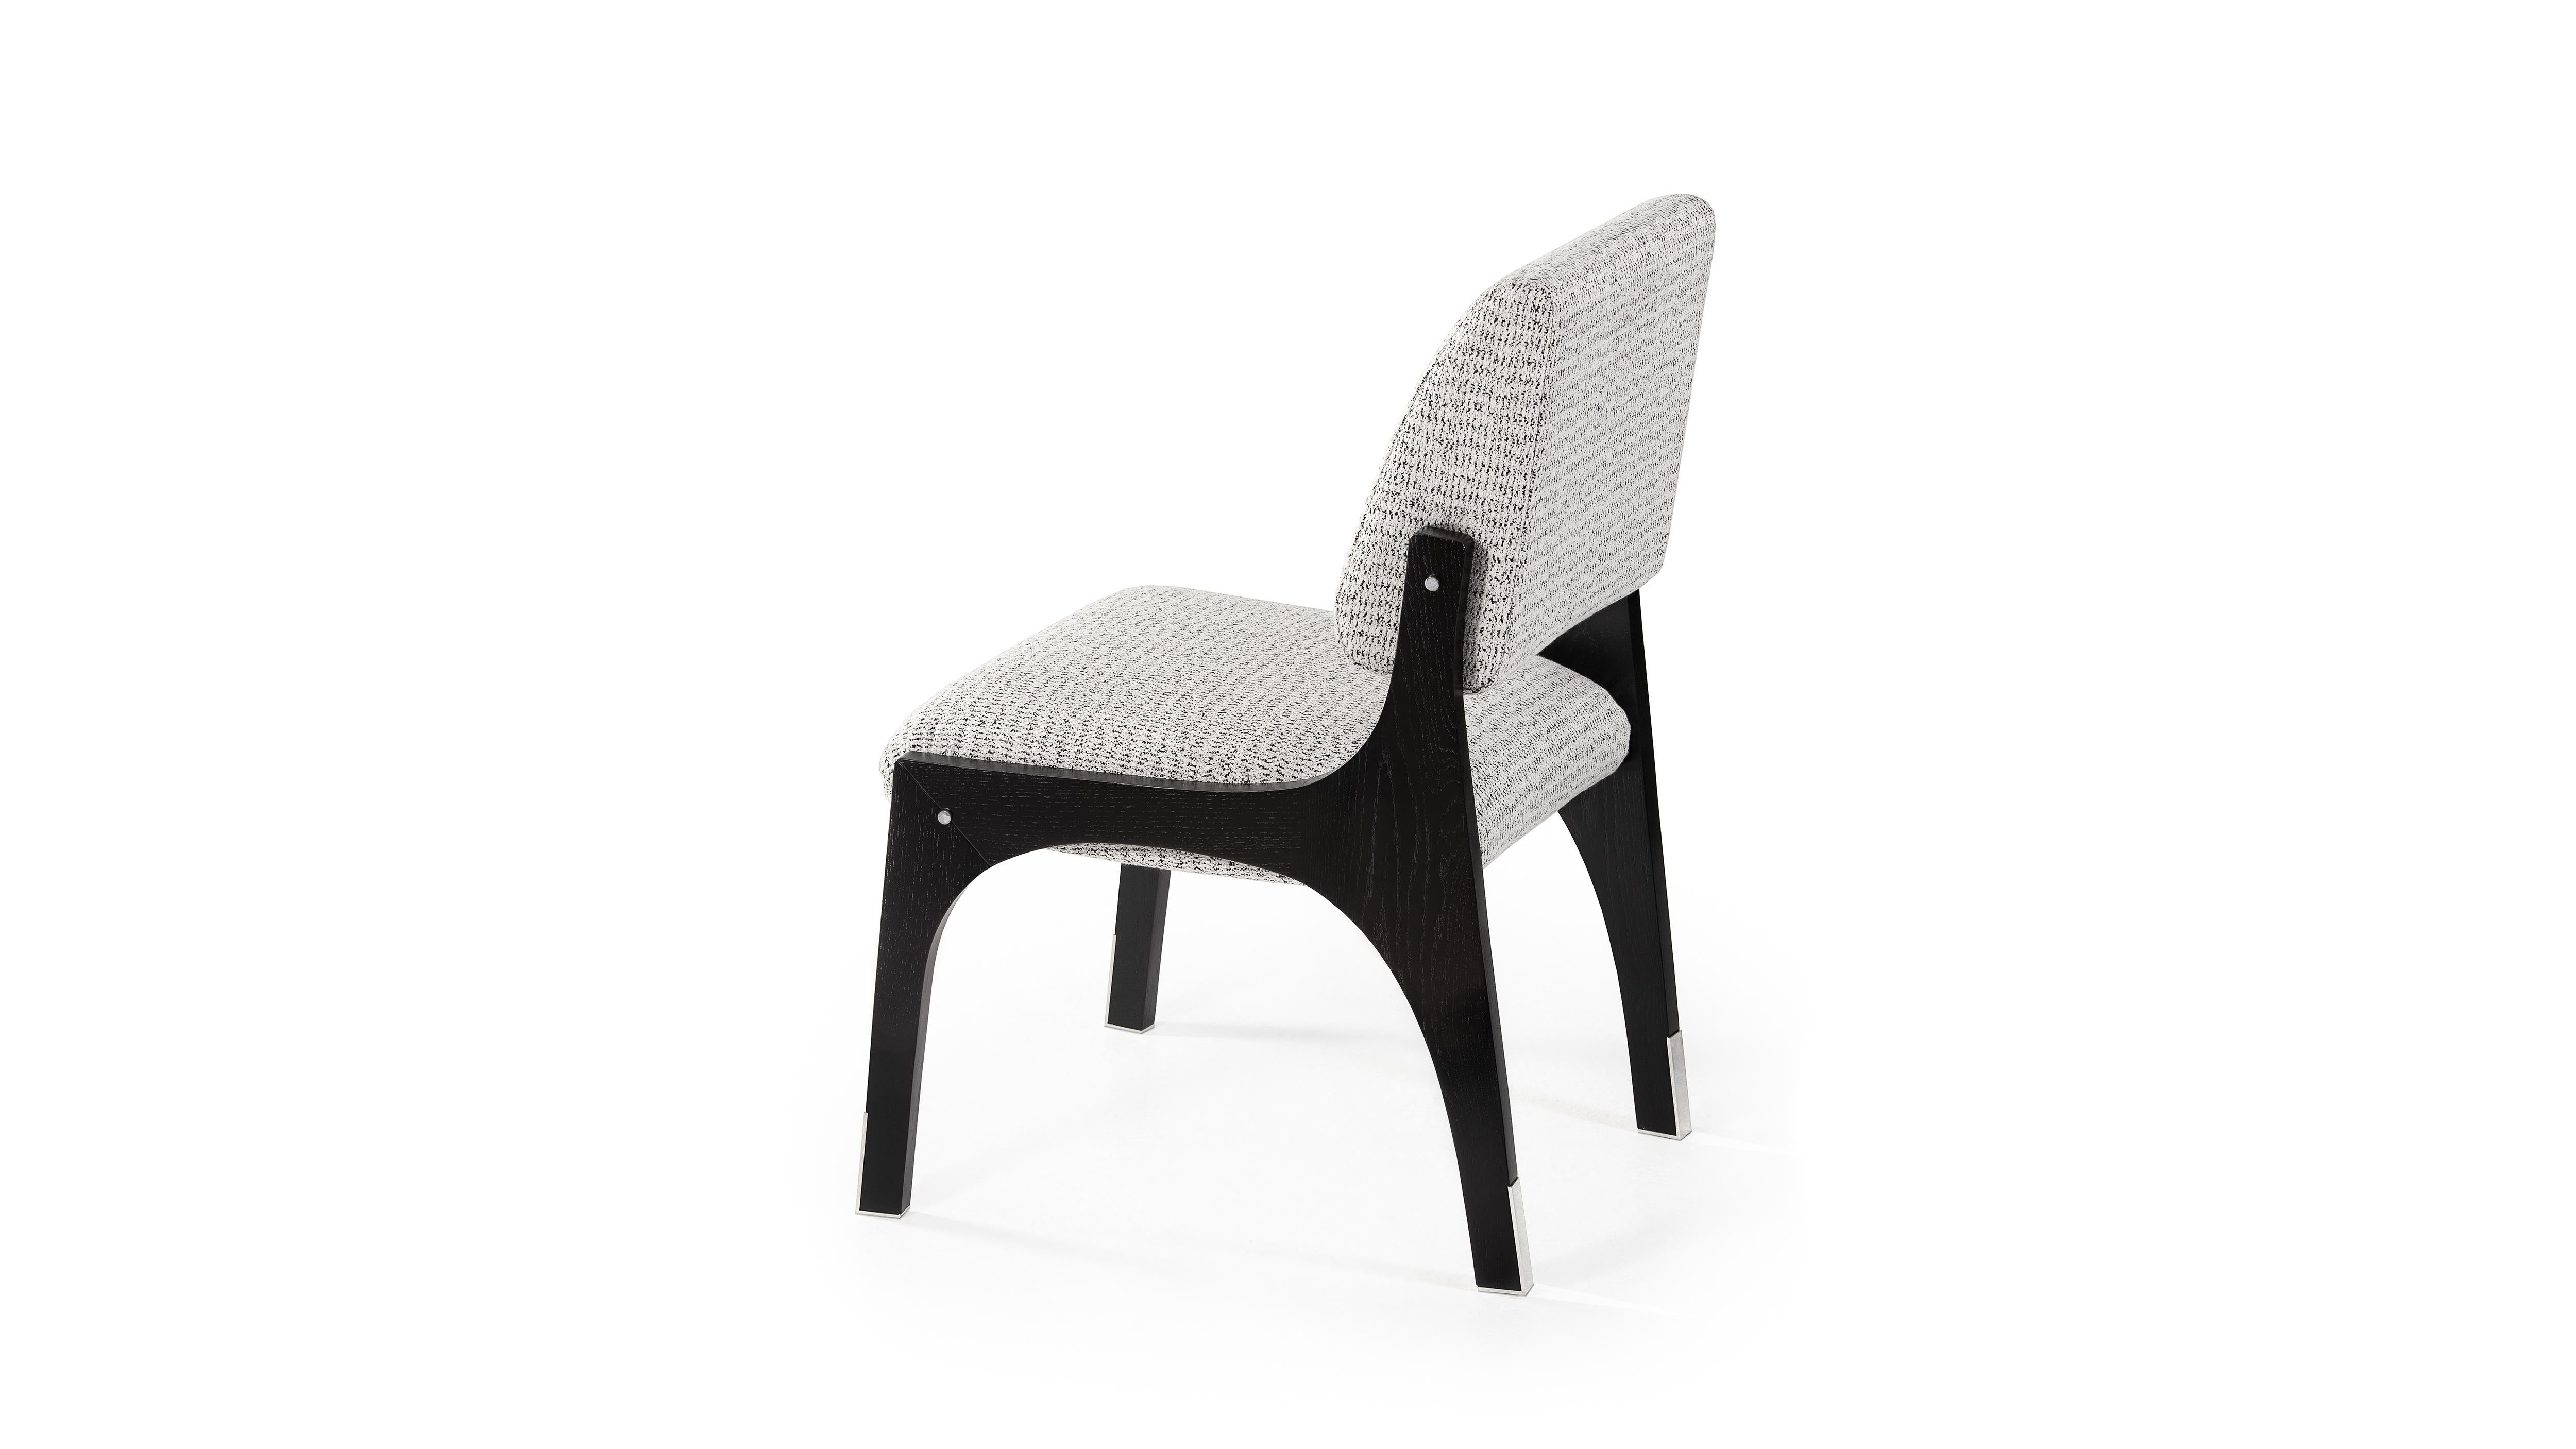 Portuguese Arches Dining Chair II by InsidherLand For Sale